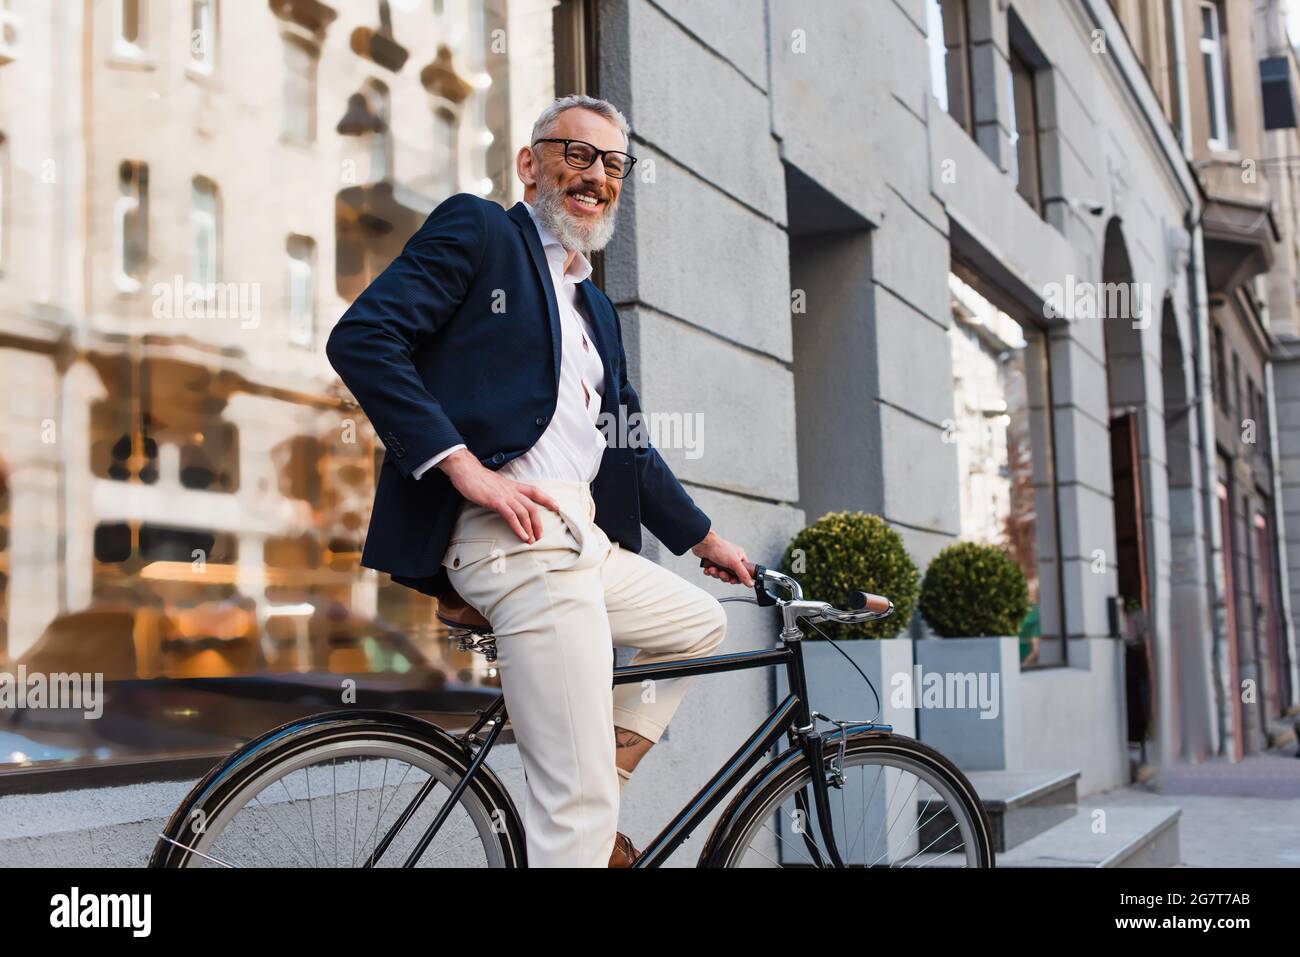 smiling bearded man in glasses posing with hand on hip and riding bicycle on urban street Stock Photo